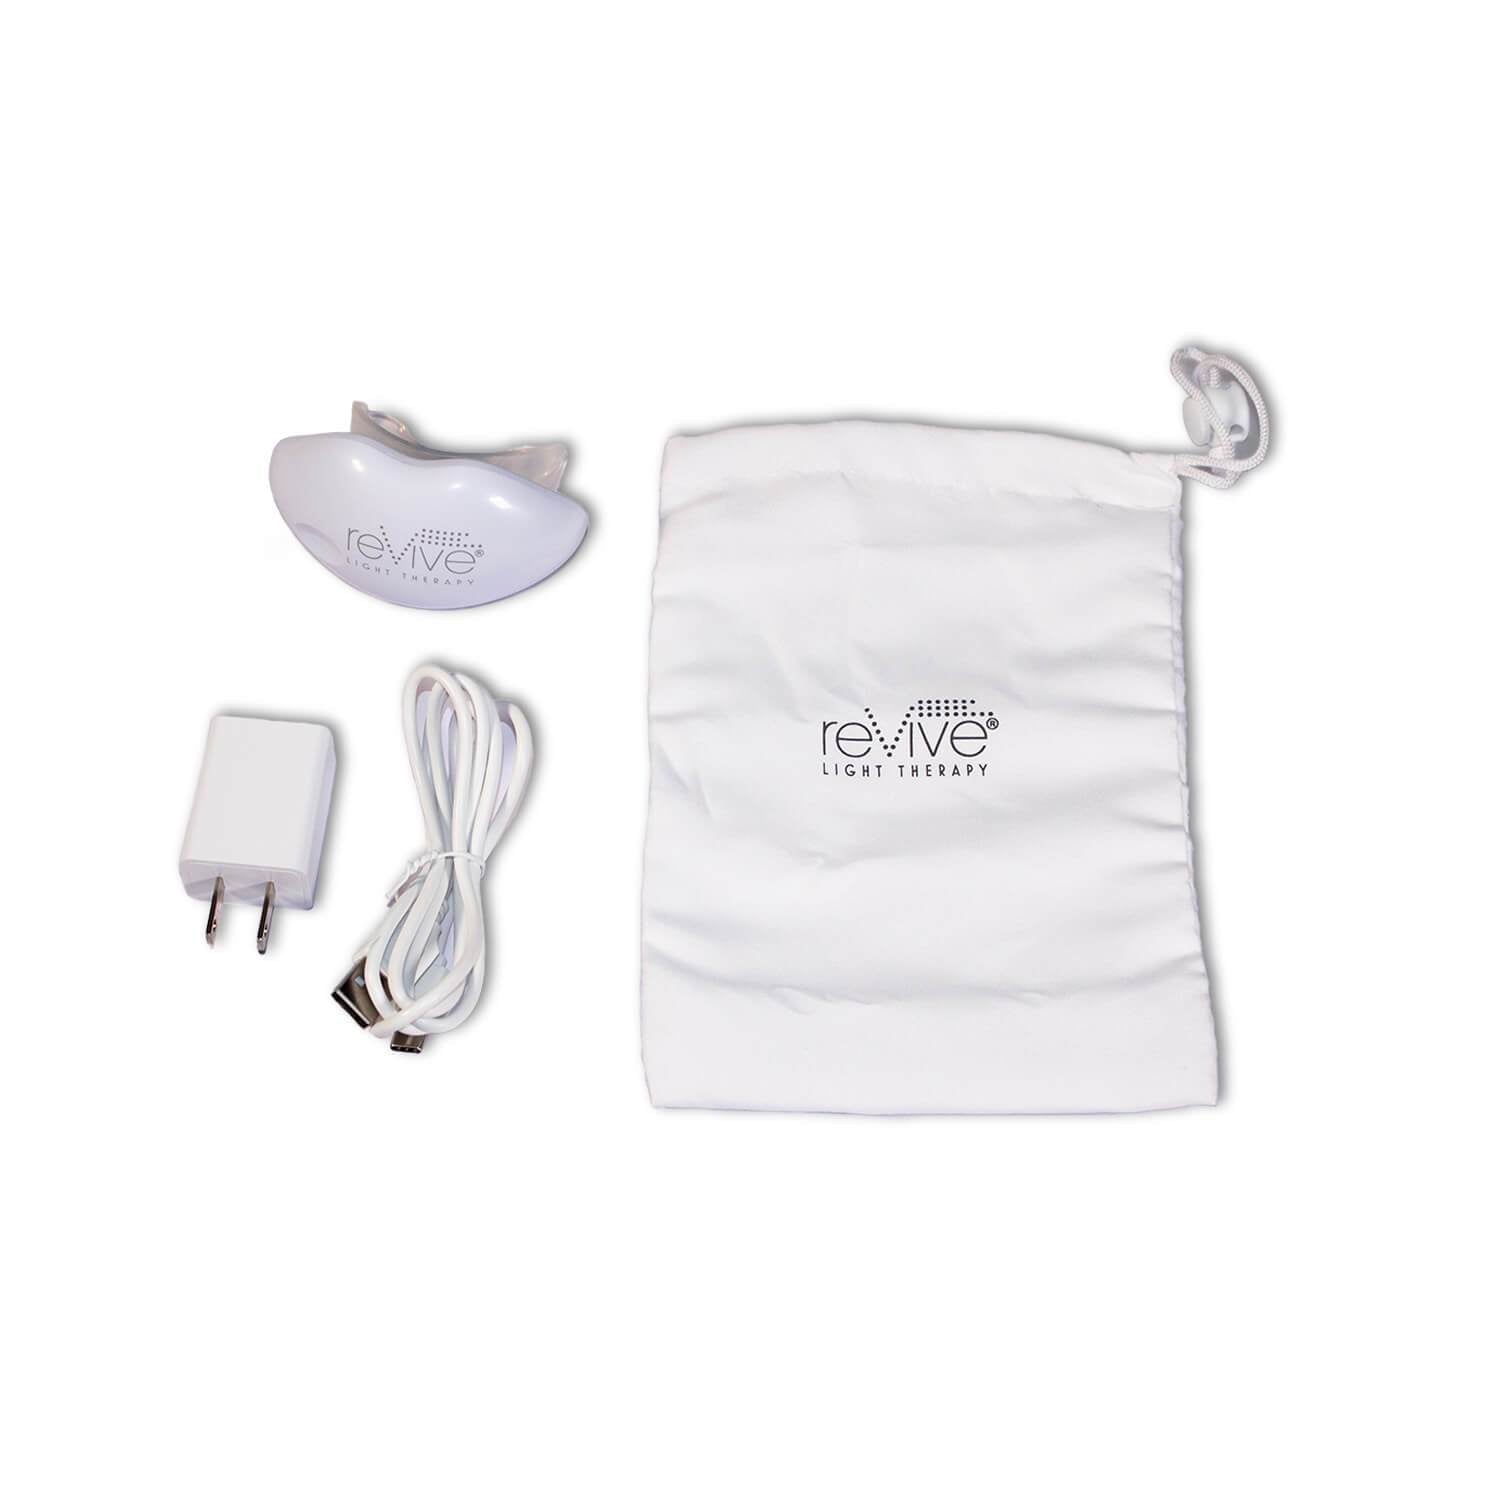 reVive Lip Care Light Therapy System: includes bag, device, and charger, on white background